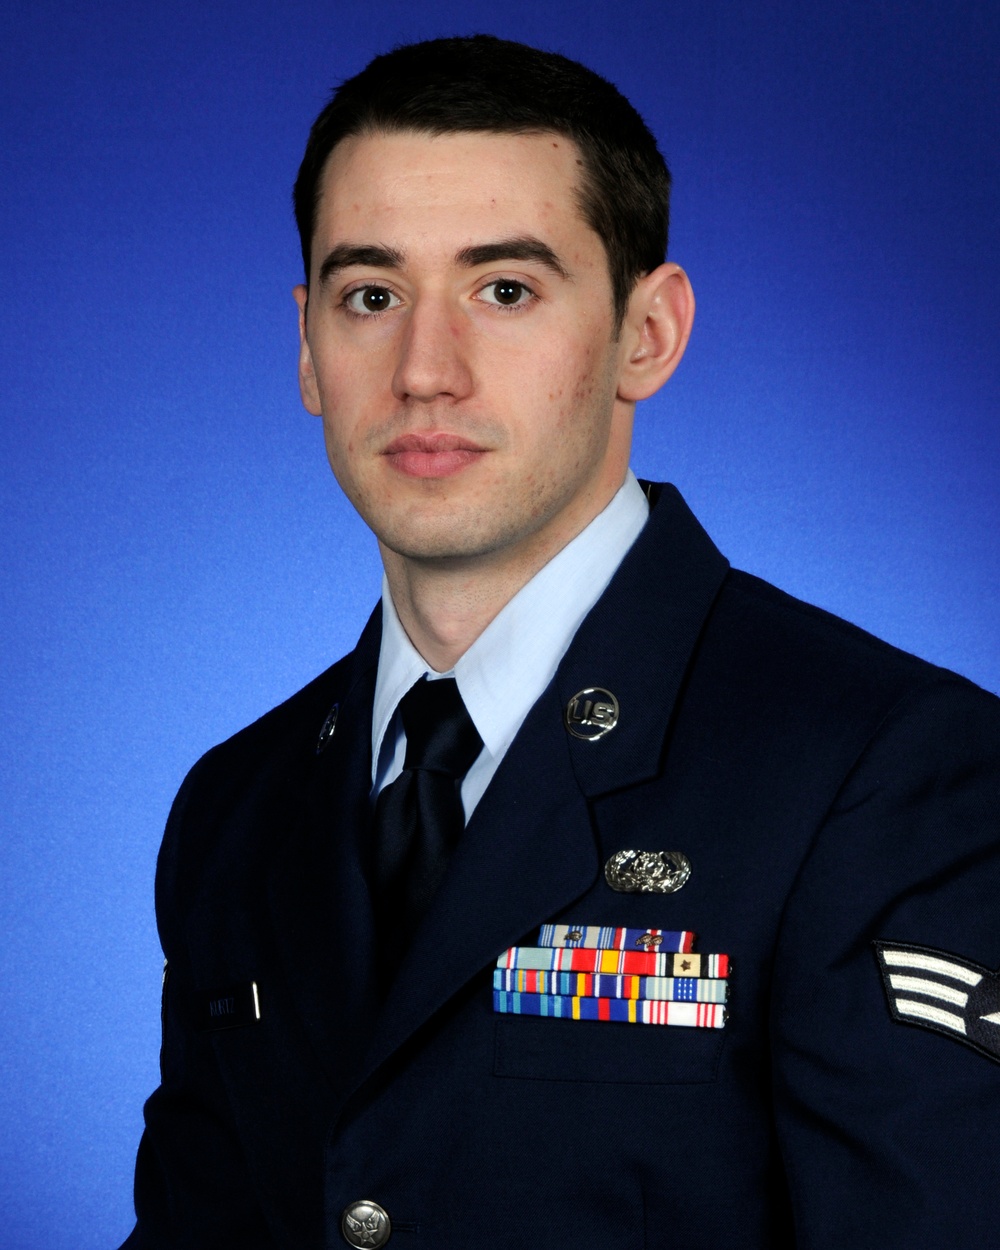 ChalleNGed: An Airman’s choice to succeed